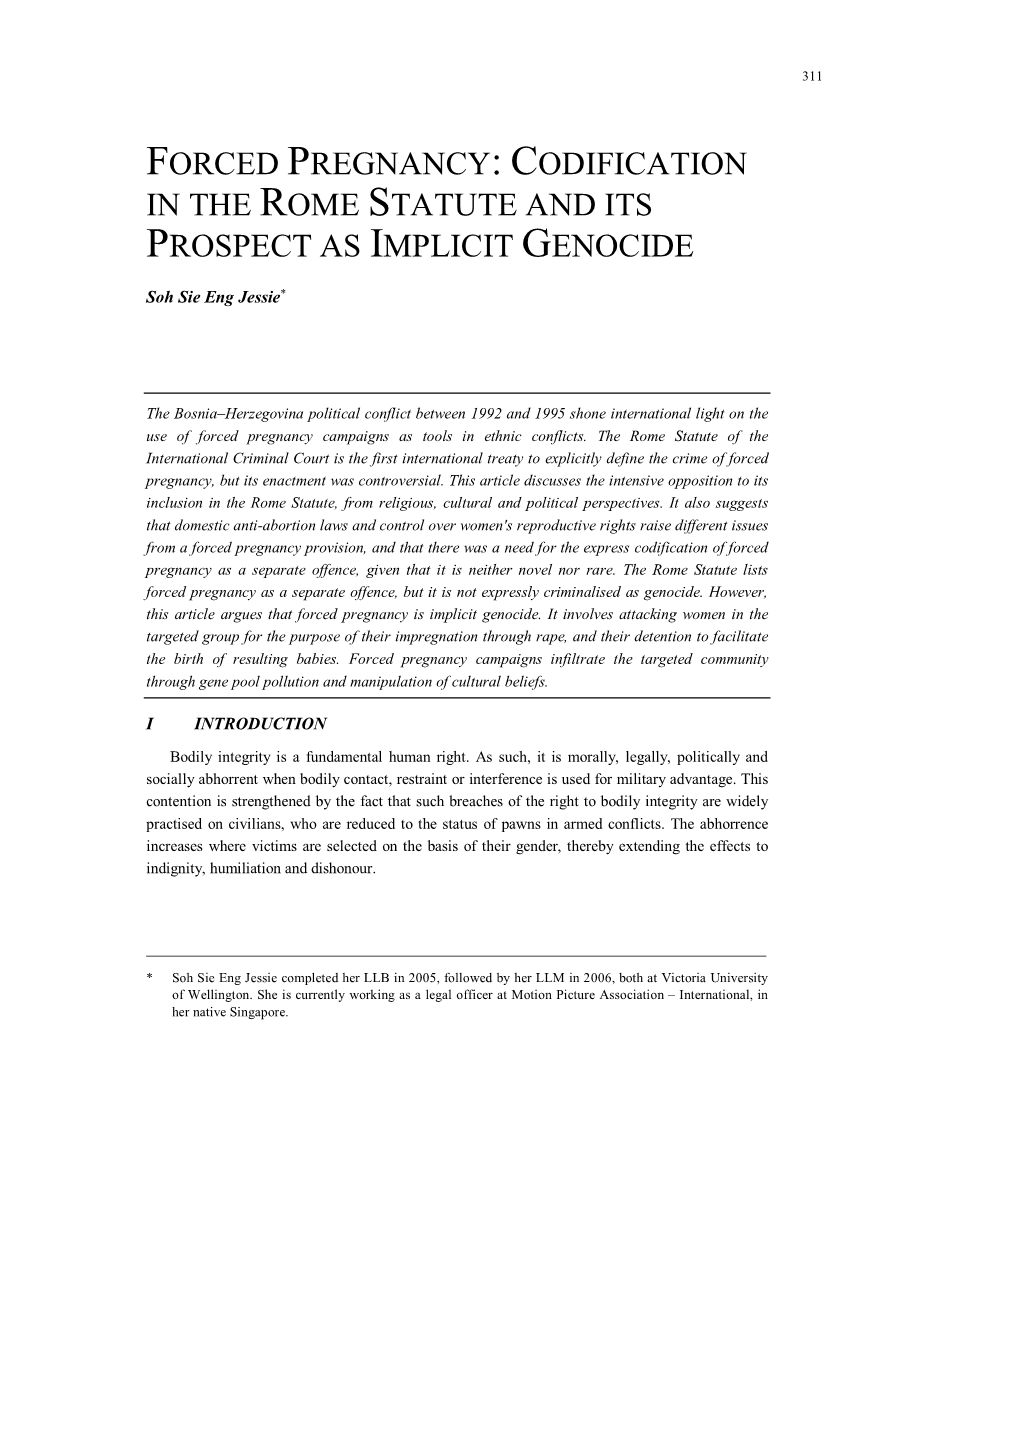 Forced Pregnancy: Codification in the Rome Statute and Its Prospect As Implicit Genocide